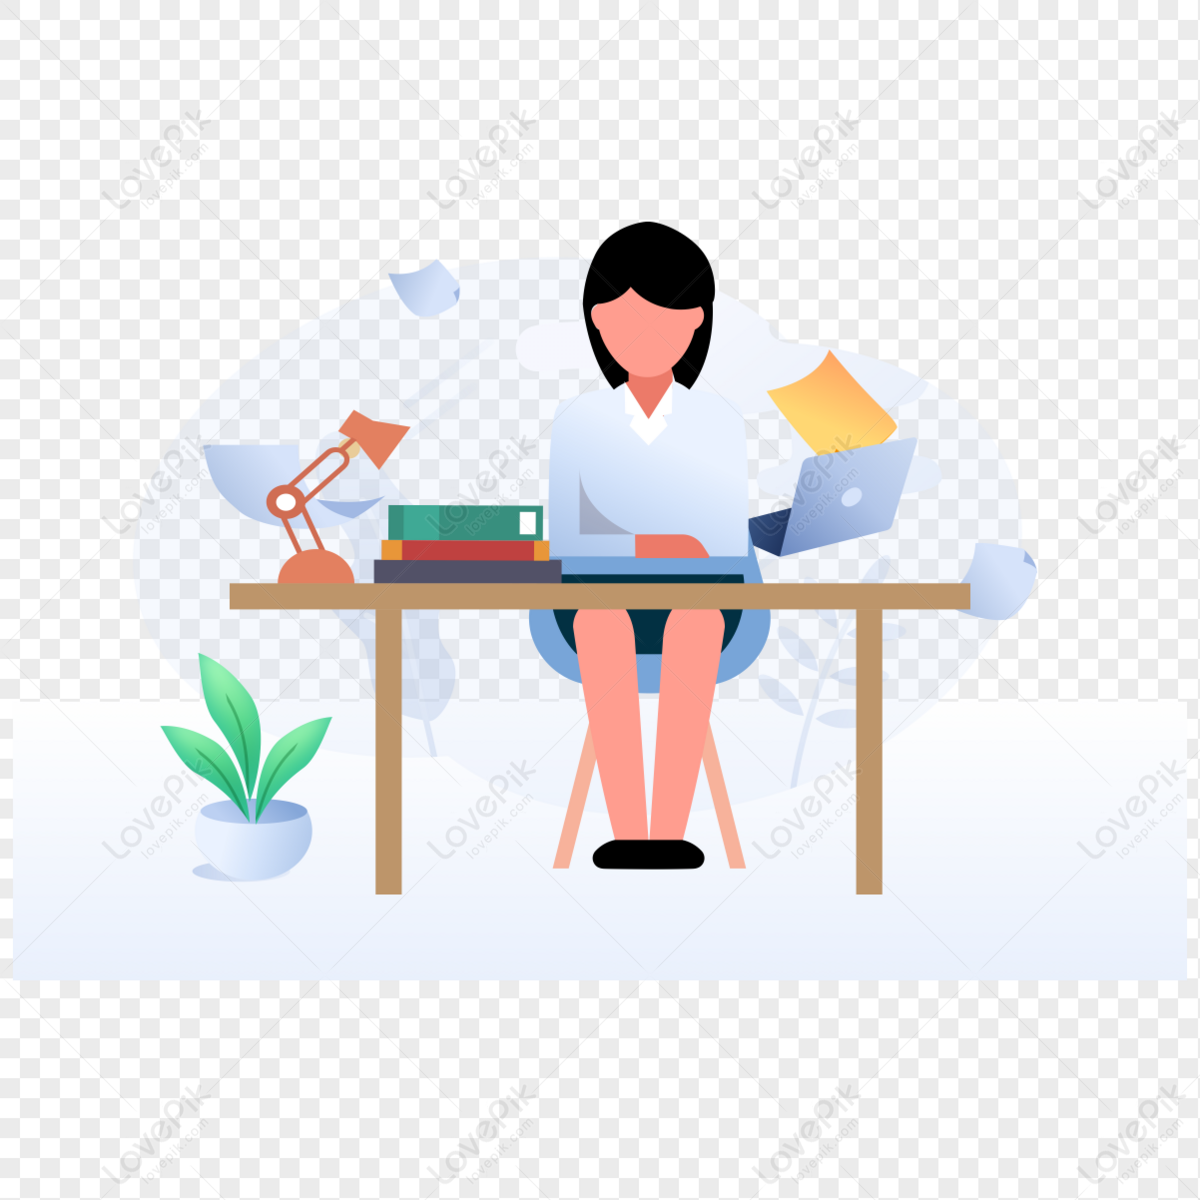 Work finishing file icon free vector illustration material, vector file, material, desk png image